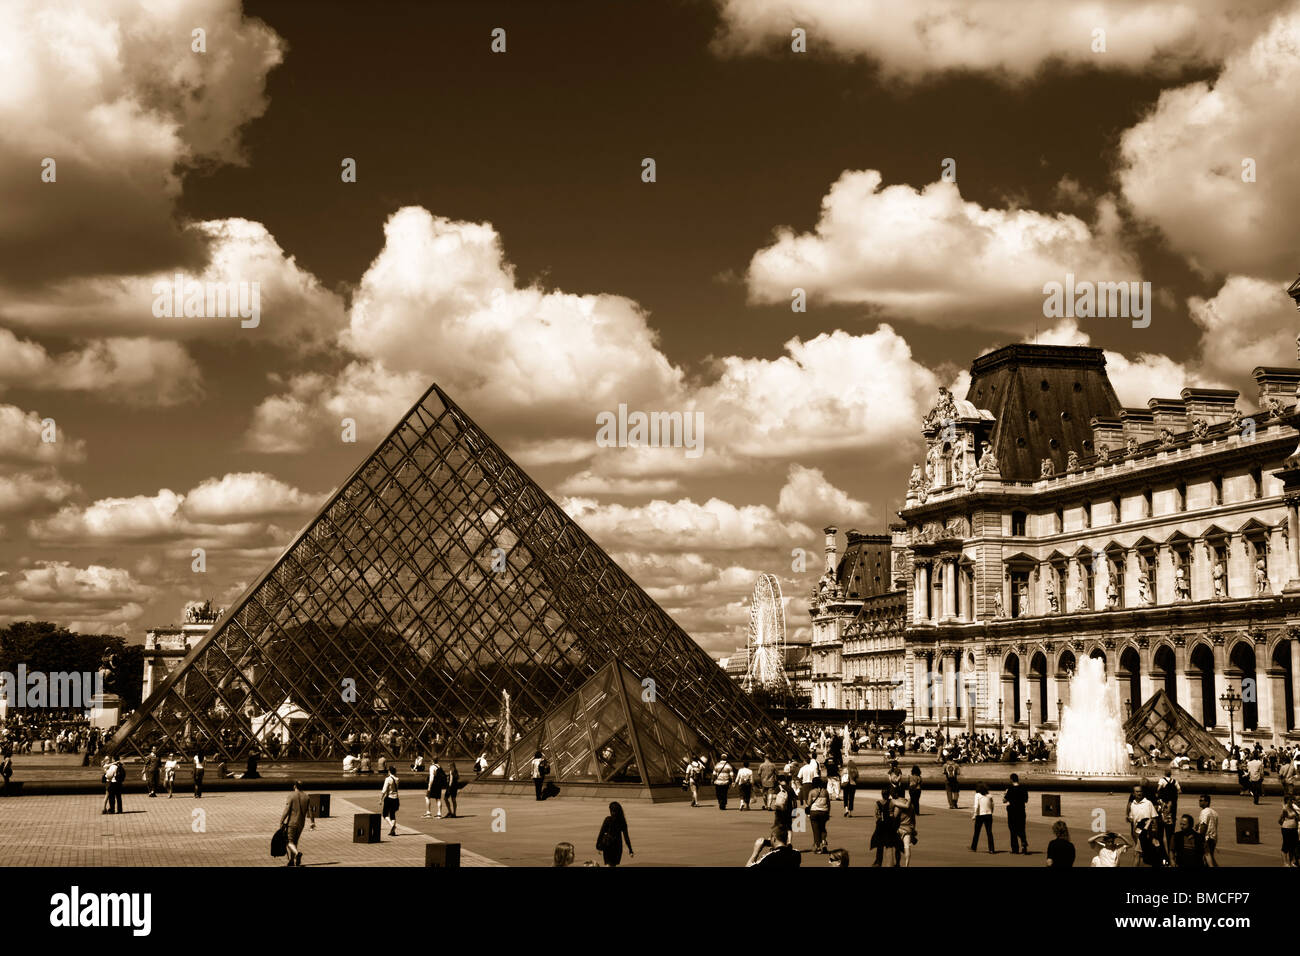 Dramatic Black and white sepia toned Panoramic view of the Glass Pyramid and fountains of the Louvre  museum Paris France Stock Photo